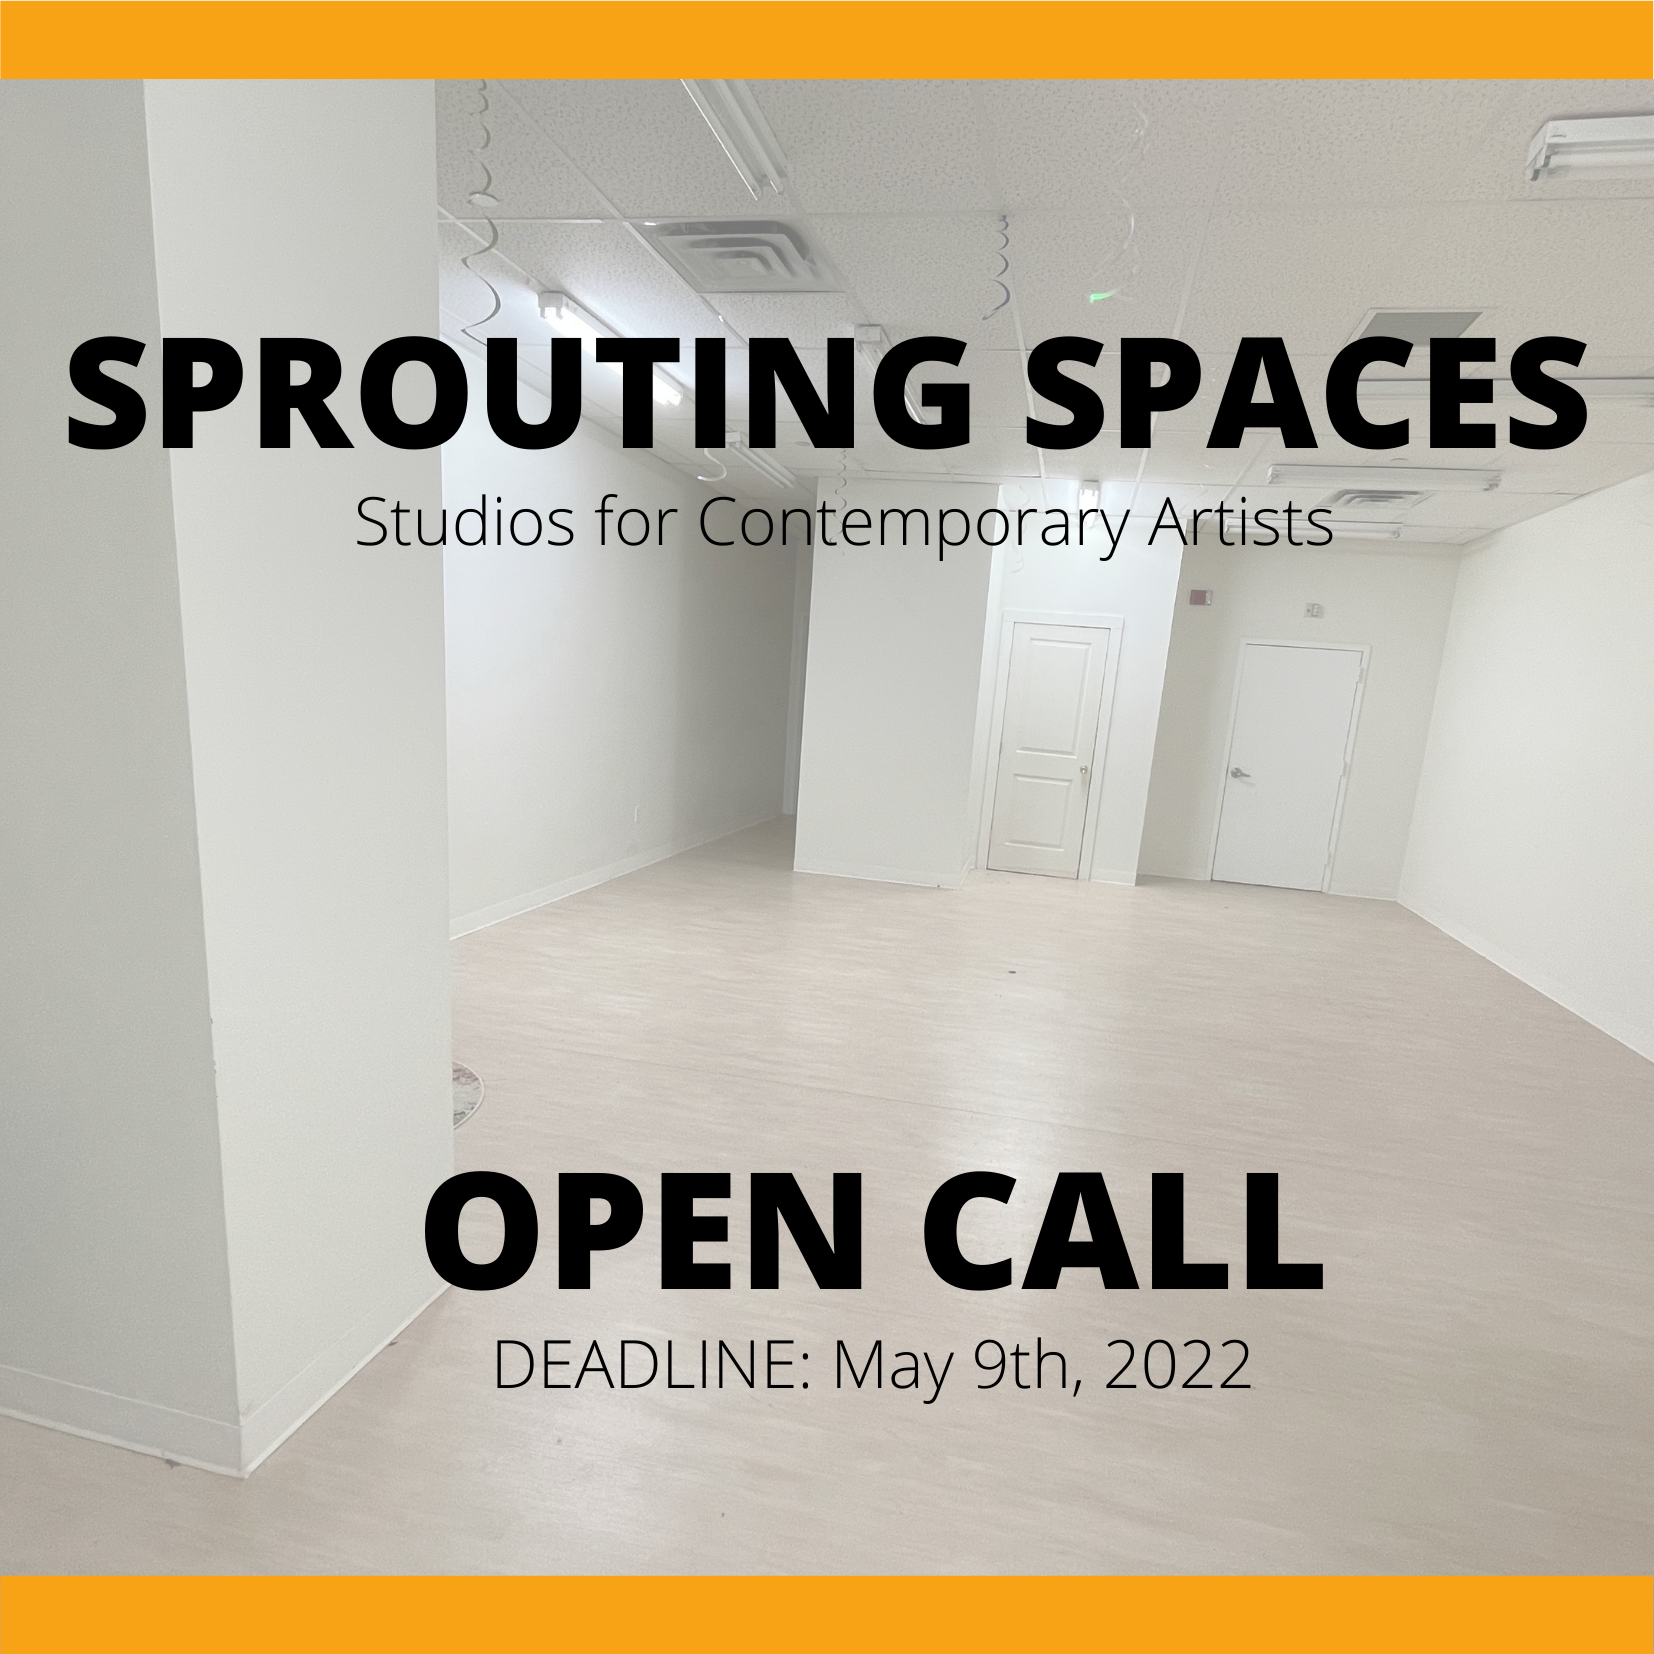 Sprouting Spaces new home, in partnership with CT Post Mall